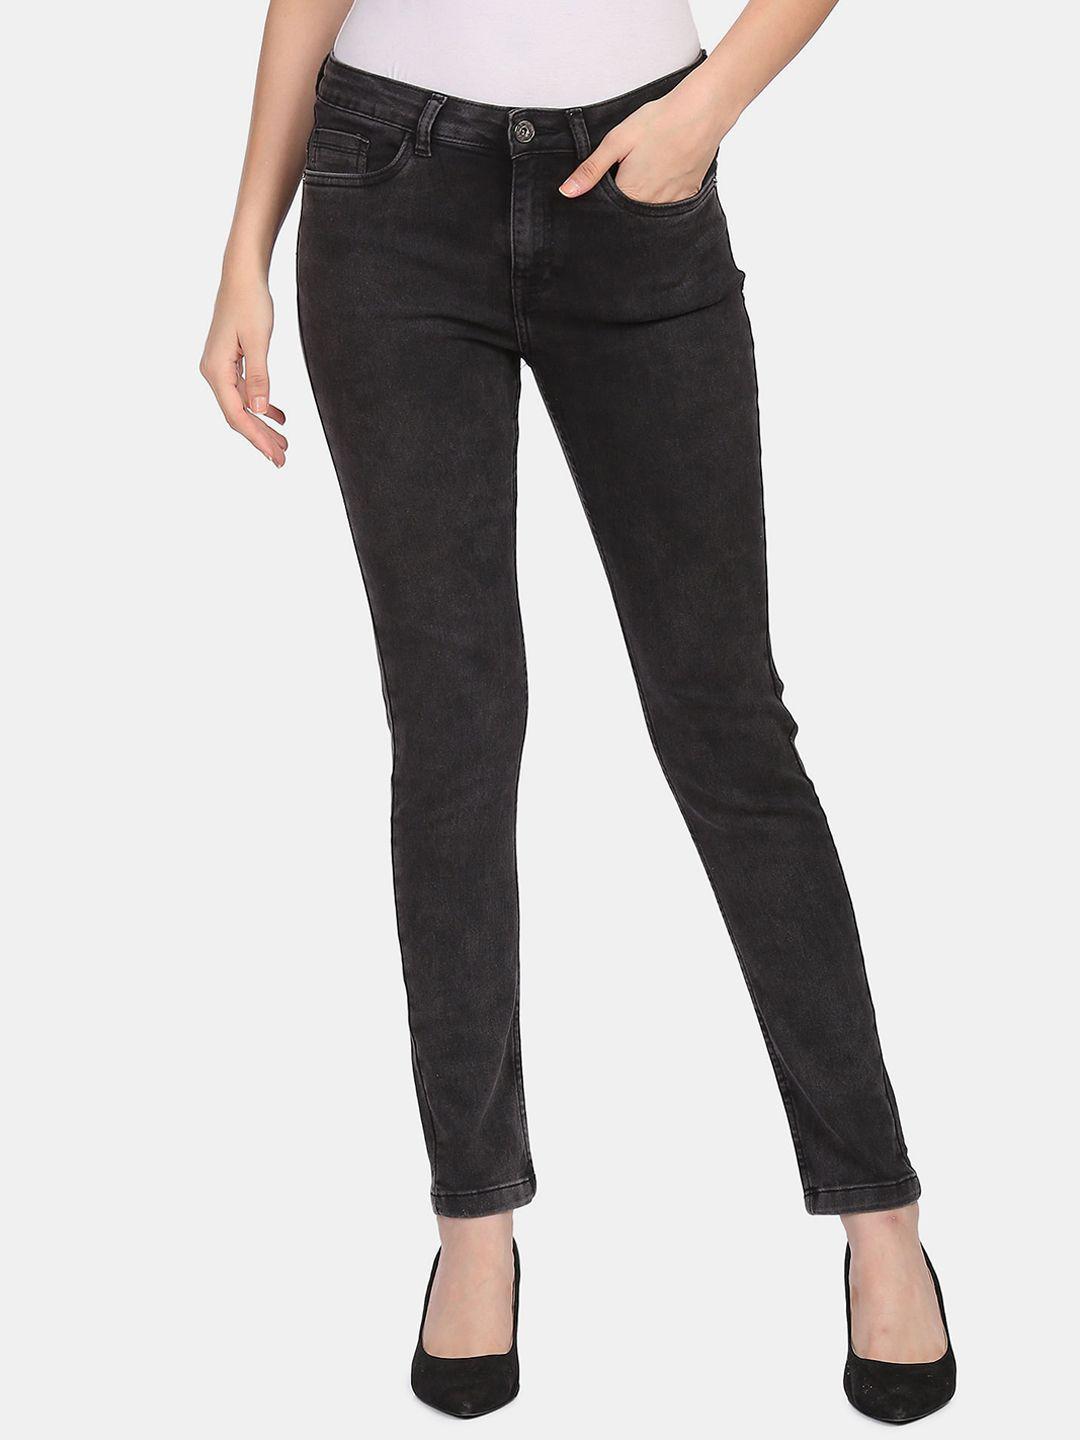 sugr women black slim fit mid-rise clean look stretchable jeans